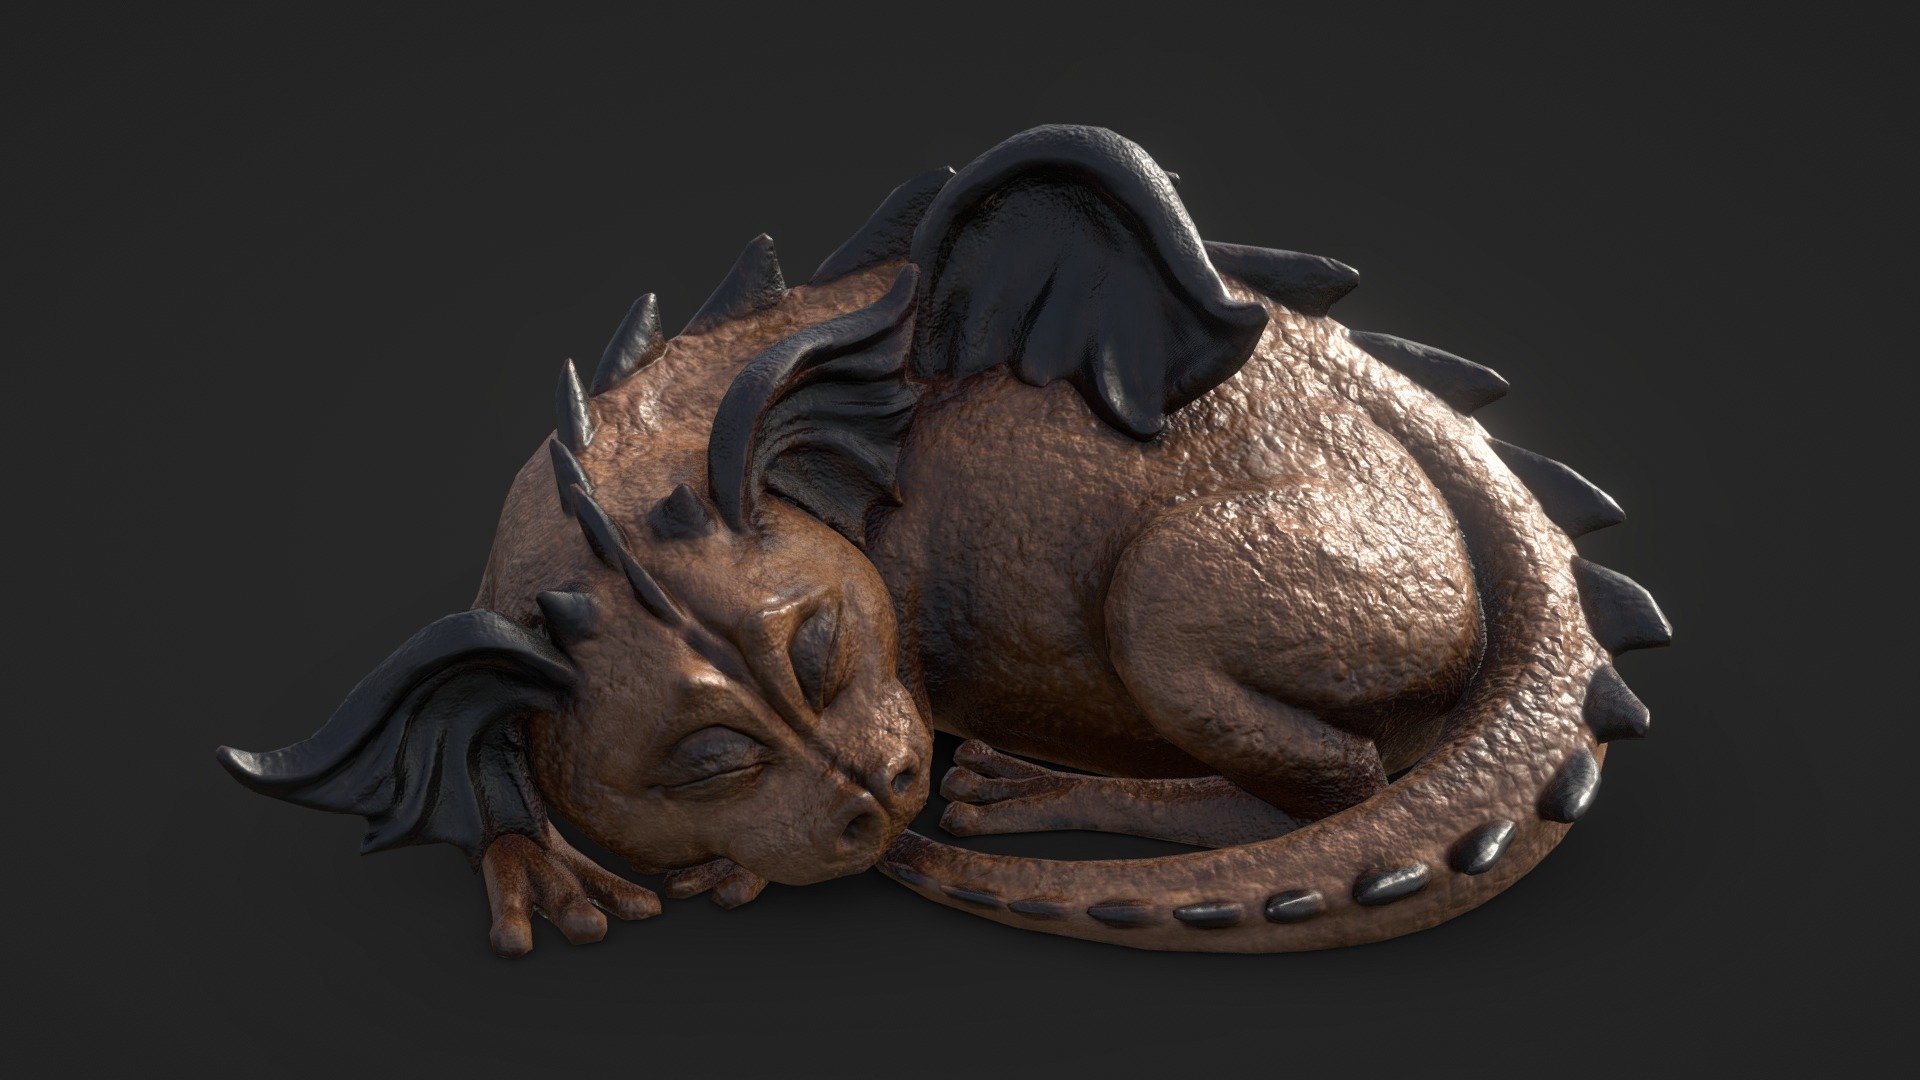 Realistic gypsum sculpture of a cute dragon painted in sand colors

Technical specifications:

Close-up model

Optimized model

non-overlapping UV map

ready for animation

PBR textures 2K resolution: Normal, Roughness, Albedo, displacement maps

Download package includes FBX and obj which are applicable for 3ds Max, Maya, Unreal Engine, Unity, Blender.

Enjoy! - Dragon Sculpture - Buy Royalty Free 3D model by Unreal 3D artists (@unreal.artists) 3d model